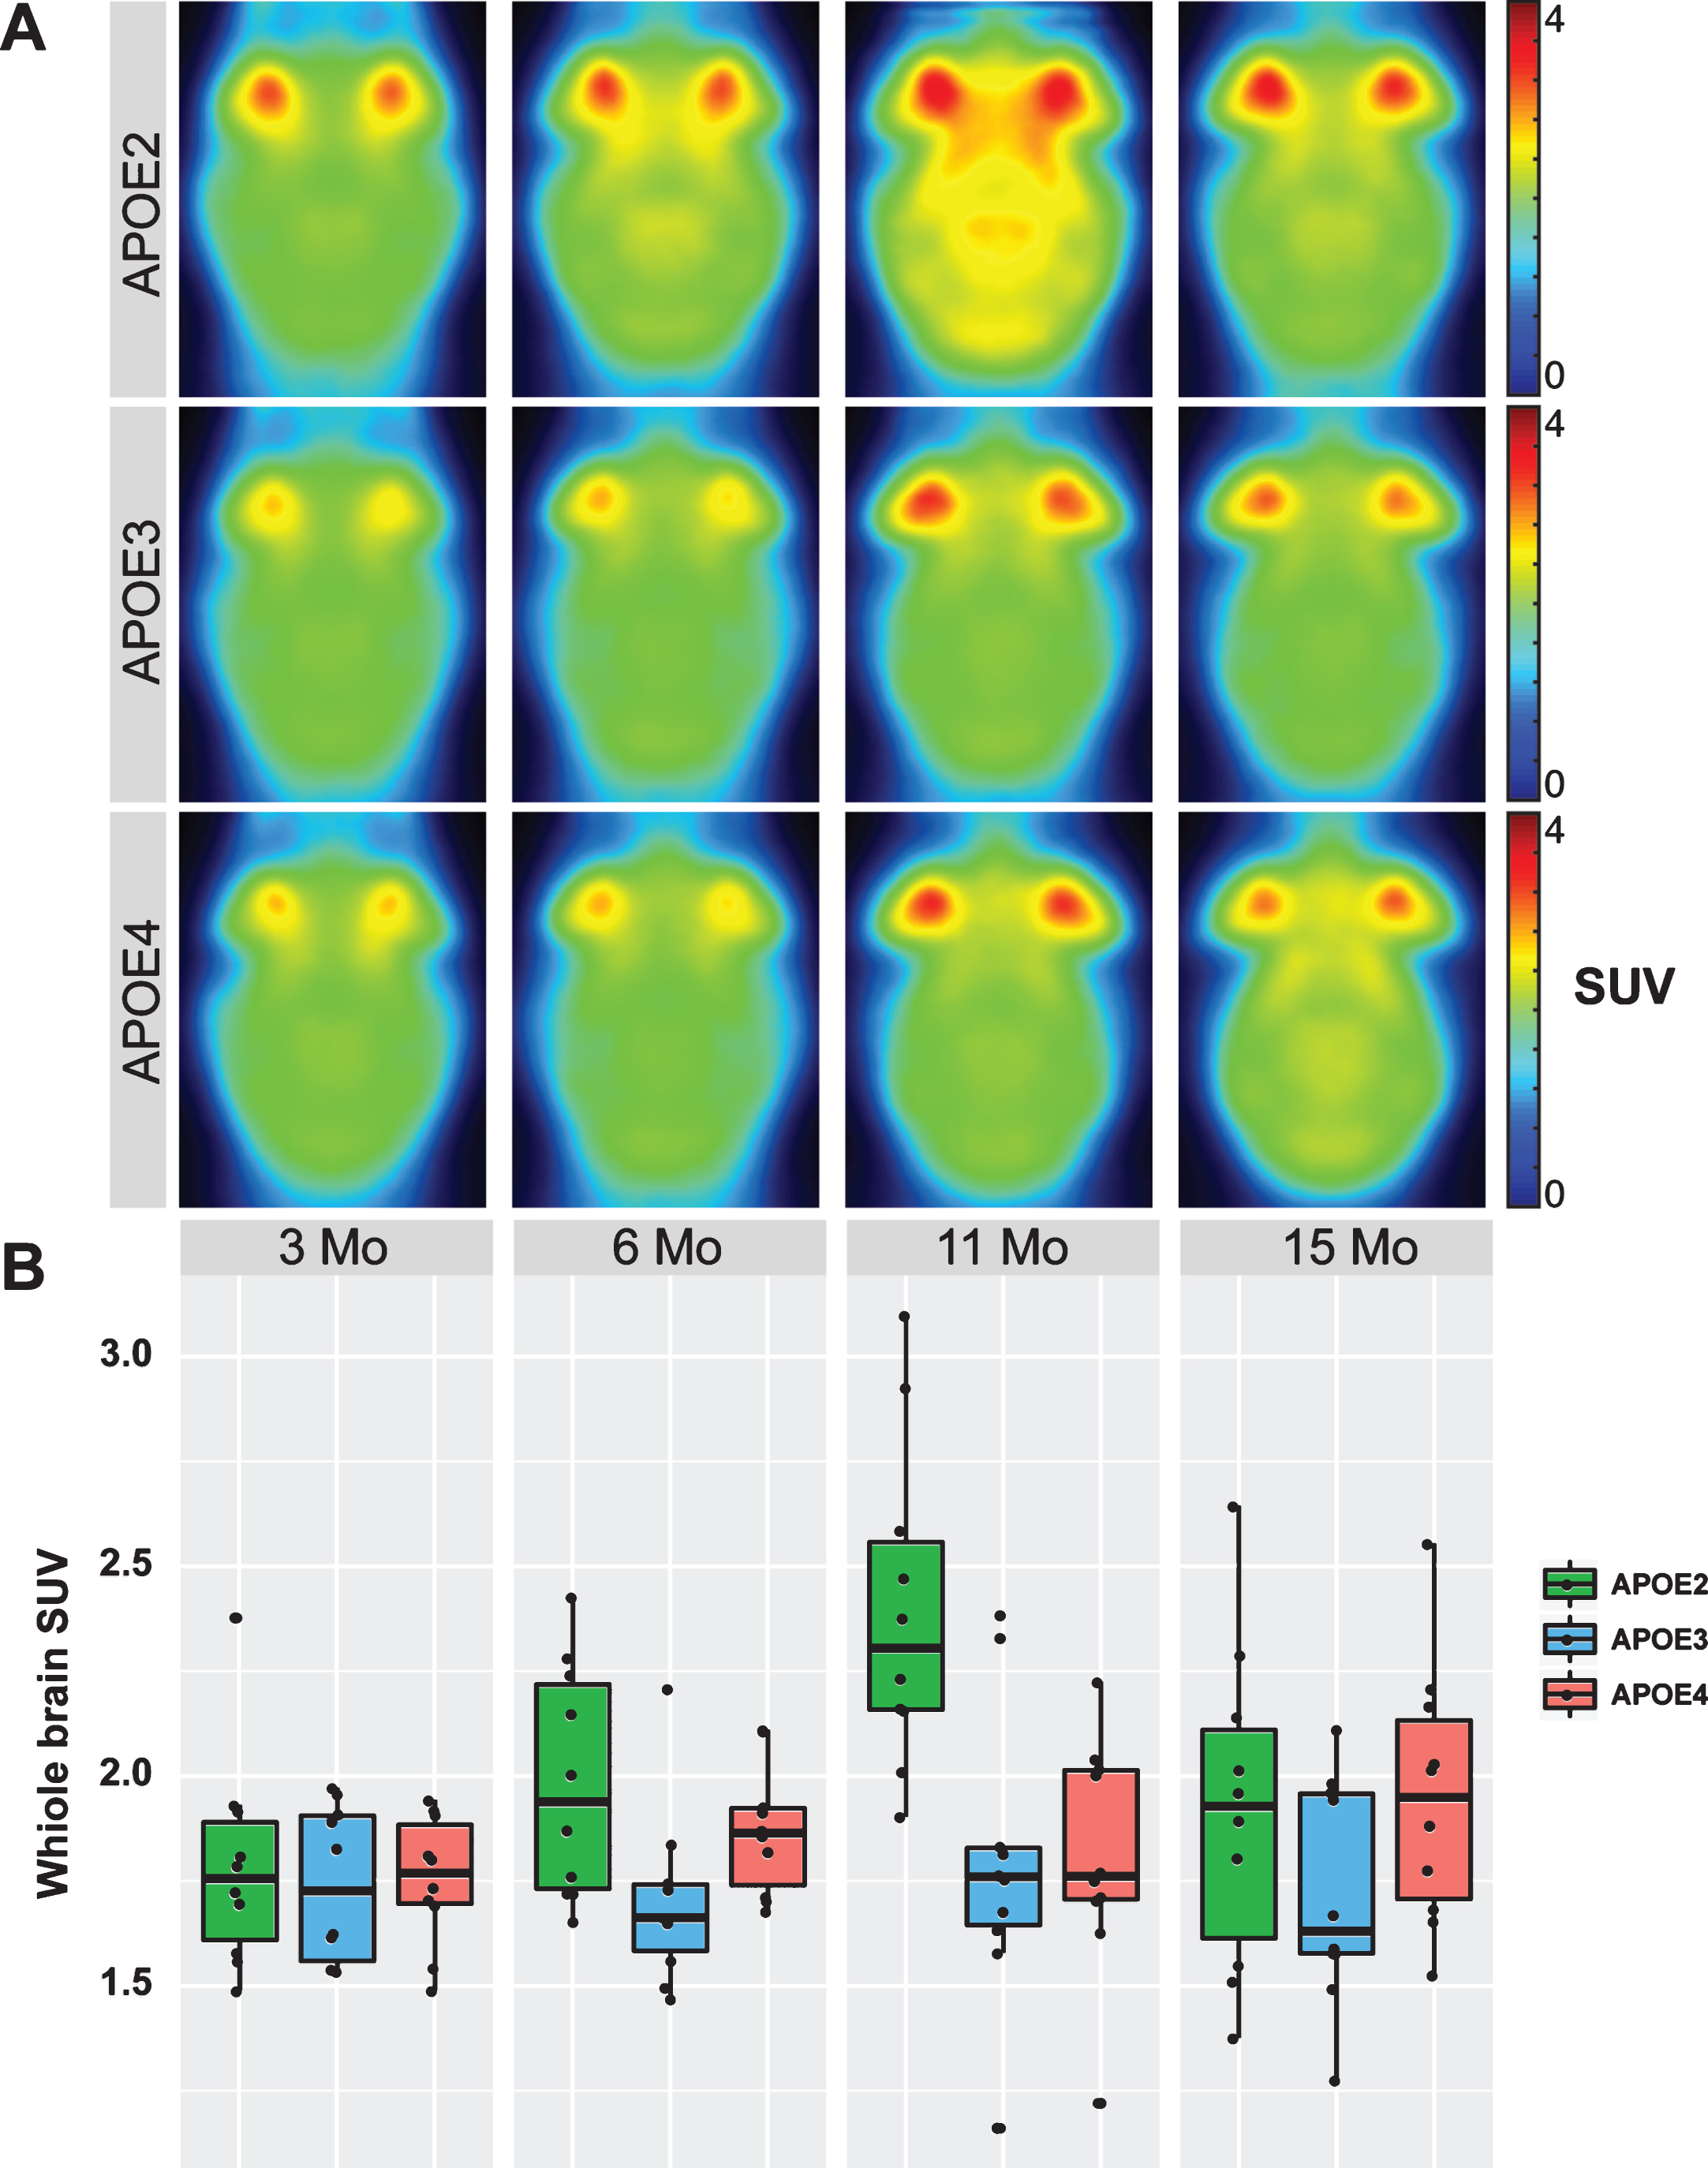 Average horizontal SUV PET images of [18F]FDG uptake in 3, 6, 11, and 15 months old APOE2/3/4 TR mice (A). Bright red spots in each PET image correspond to the Harderian glands. Quantification of the whole brain SUV (B). Boxplots show median and the 25th and 75th percentiles; upper and lower whisker extends±1.5 times the inter-quartile range. Raw data points are plotted superimposed to the boxplot